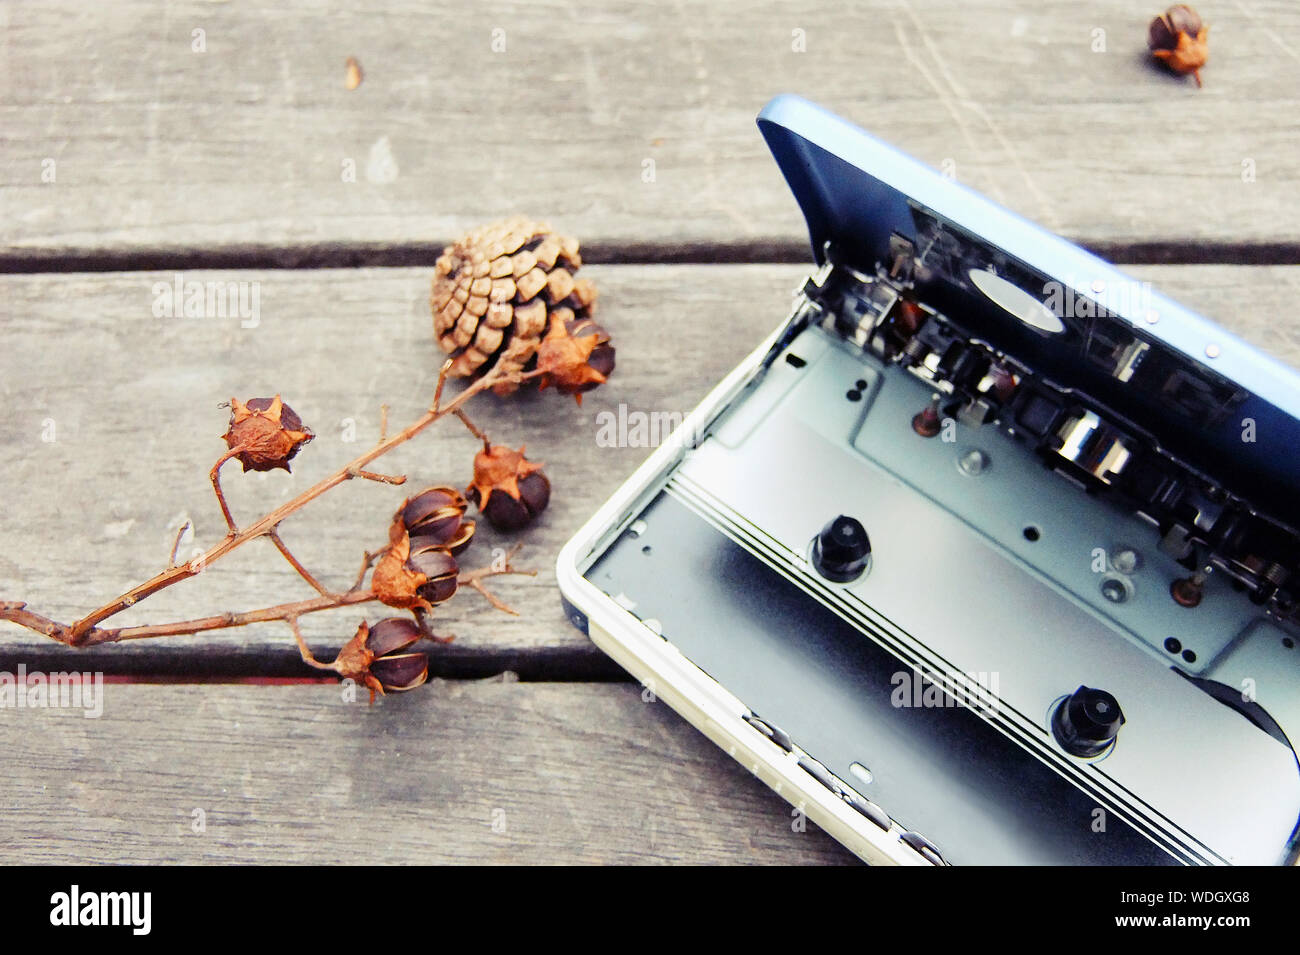 Close-up Of Personal Cassette Player With Plant On Wooden Table Stock Photo